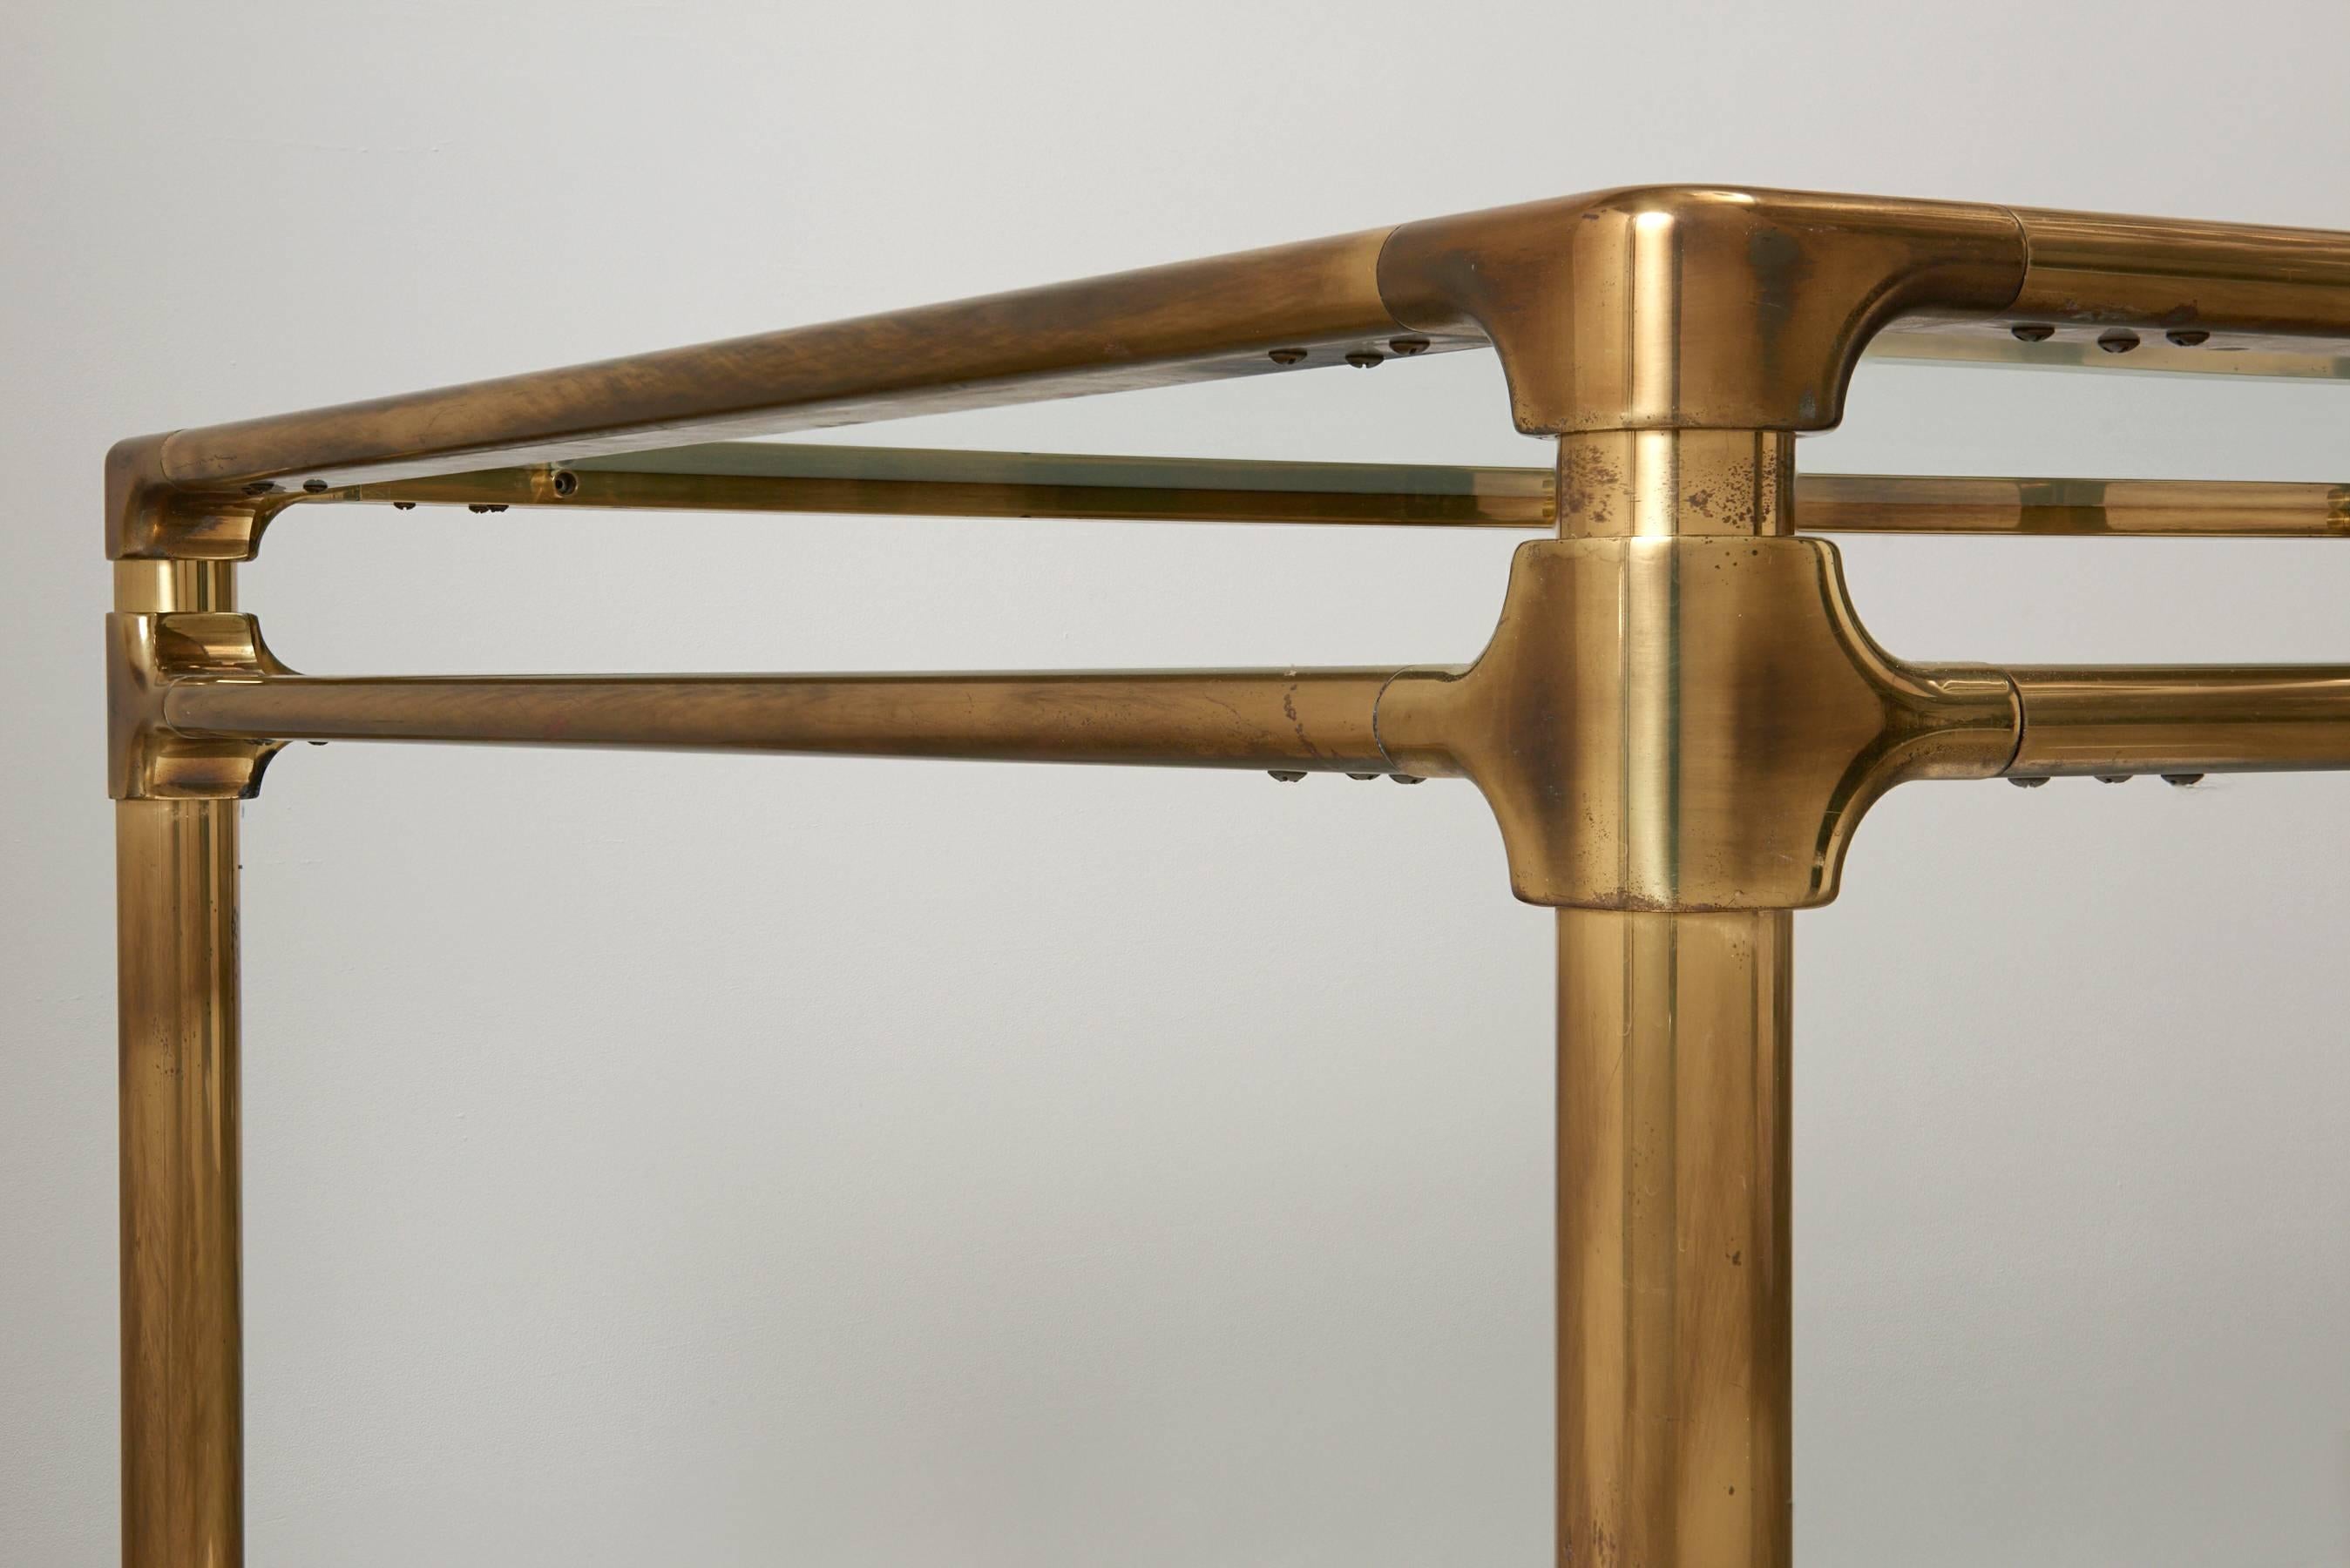 Oversized brass and glass dining table produced by Mastercraft in the early 1970s. Brass frame is lightly patinated with a brushed pattern. Glass has been replaced. 

Table breaks down for shipping.